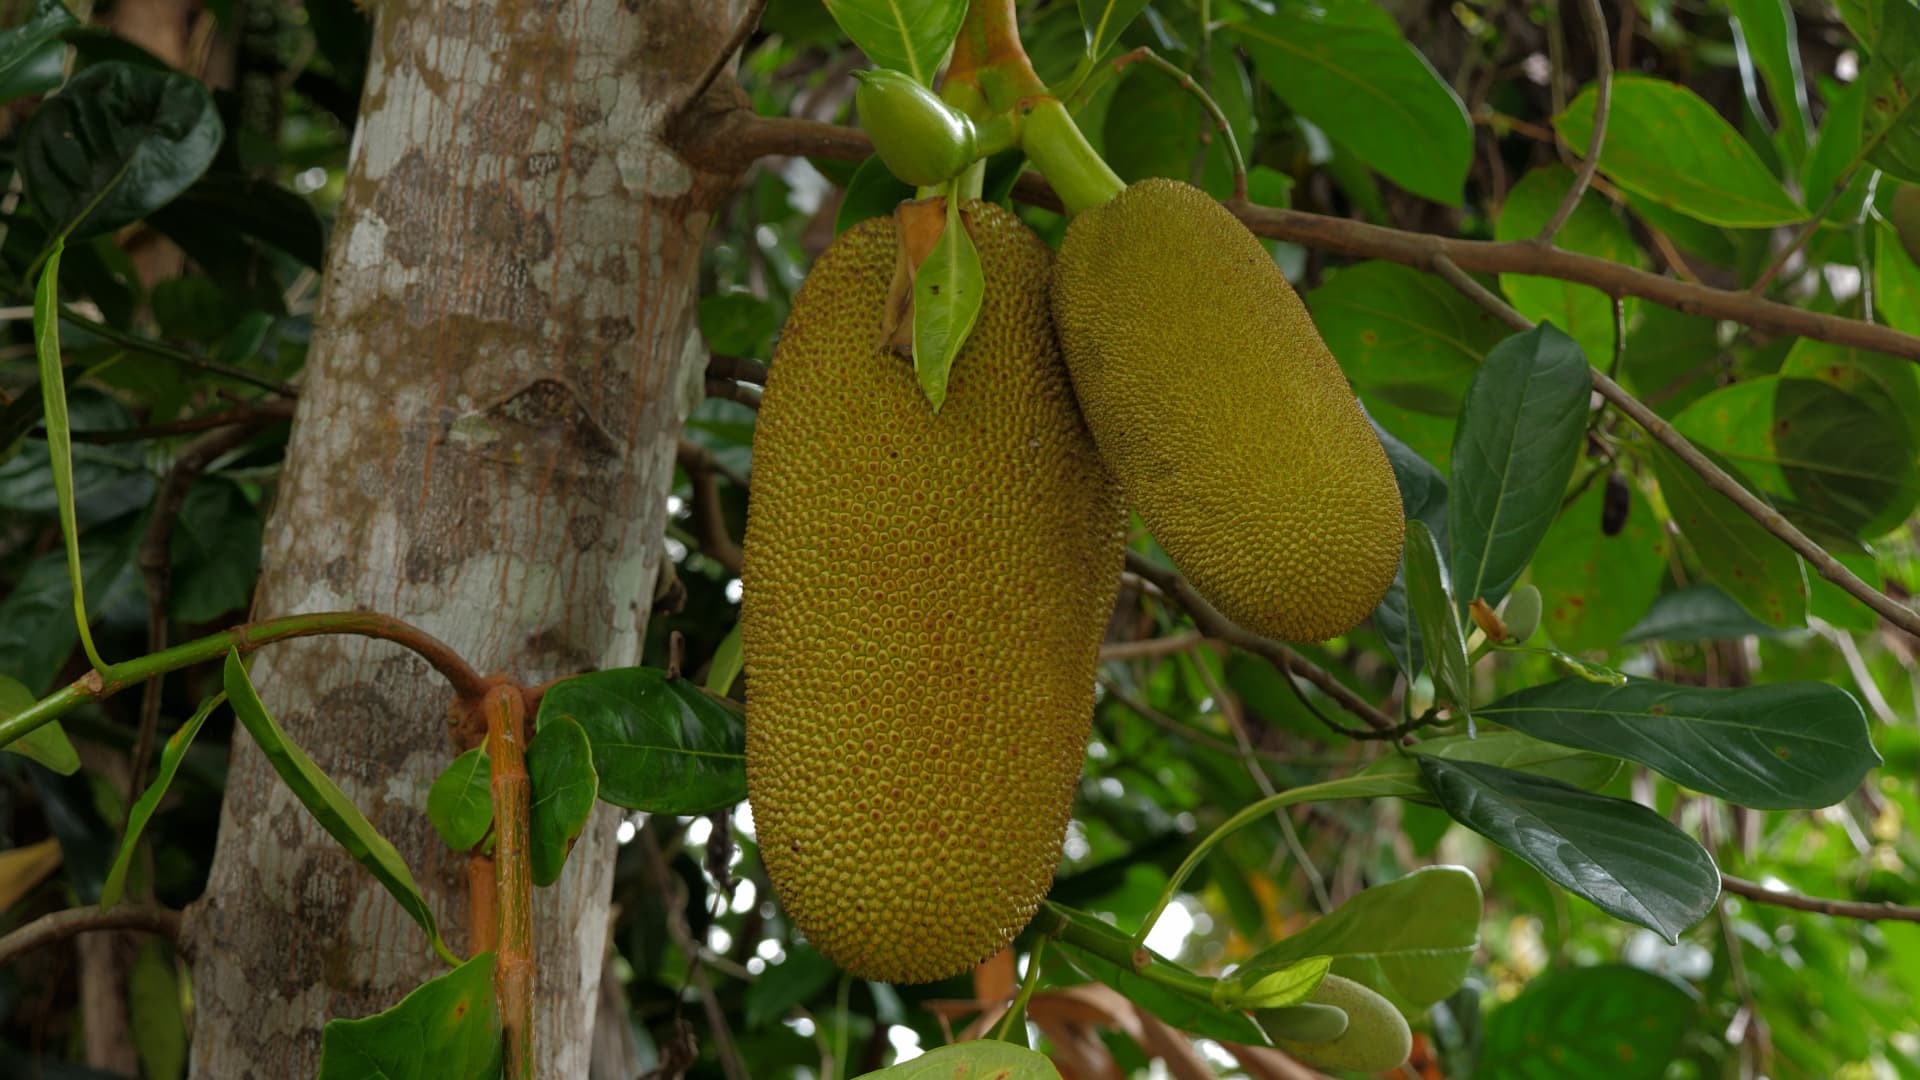 Jackfruit is commonly used in many South and Southeast Asian dishes.